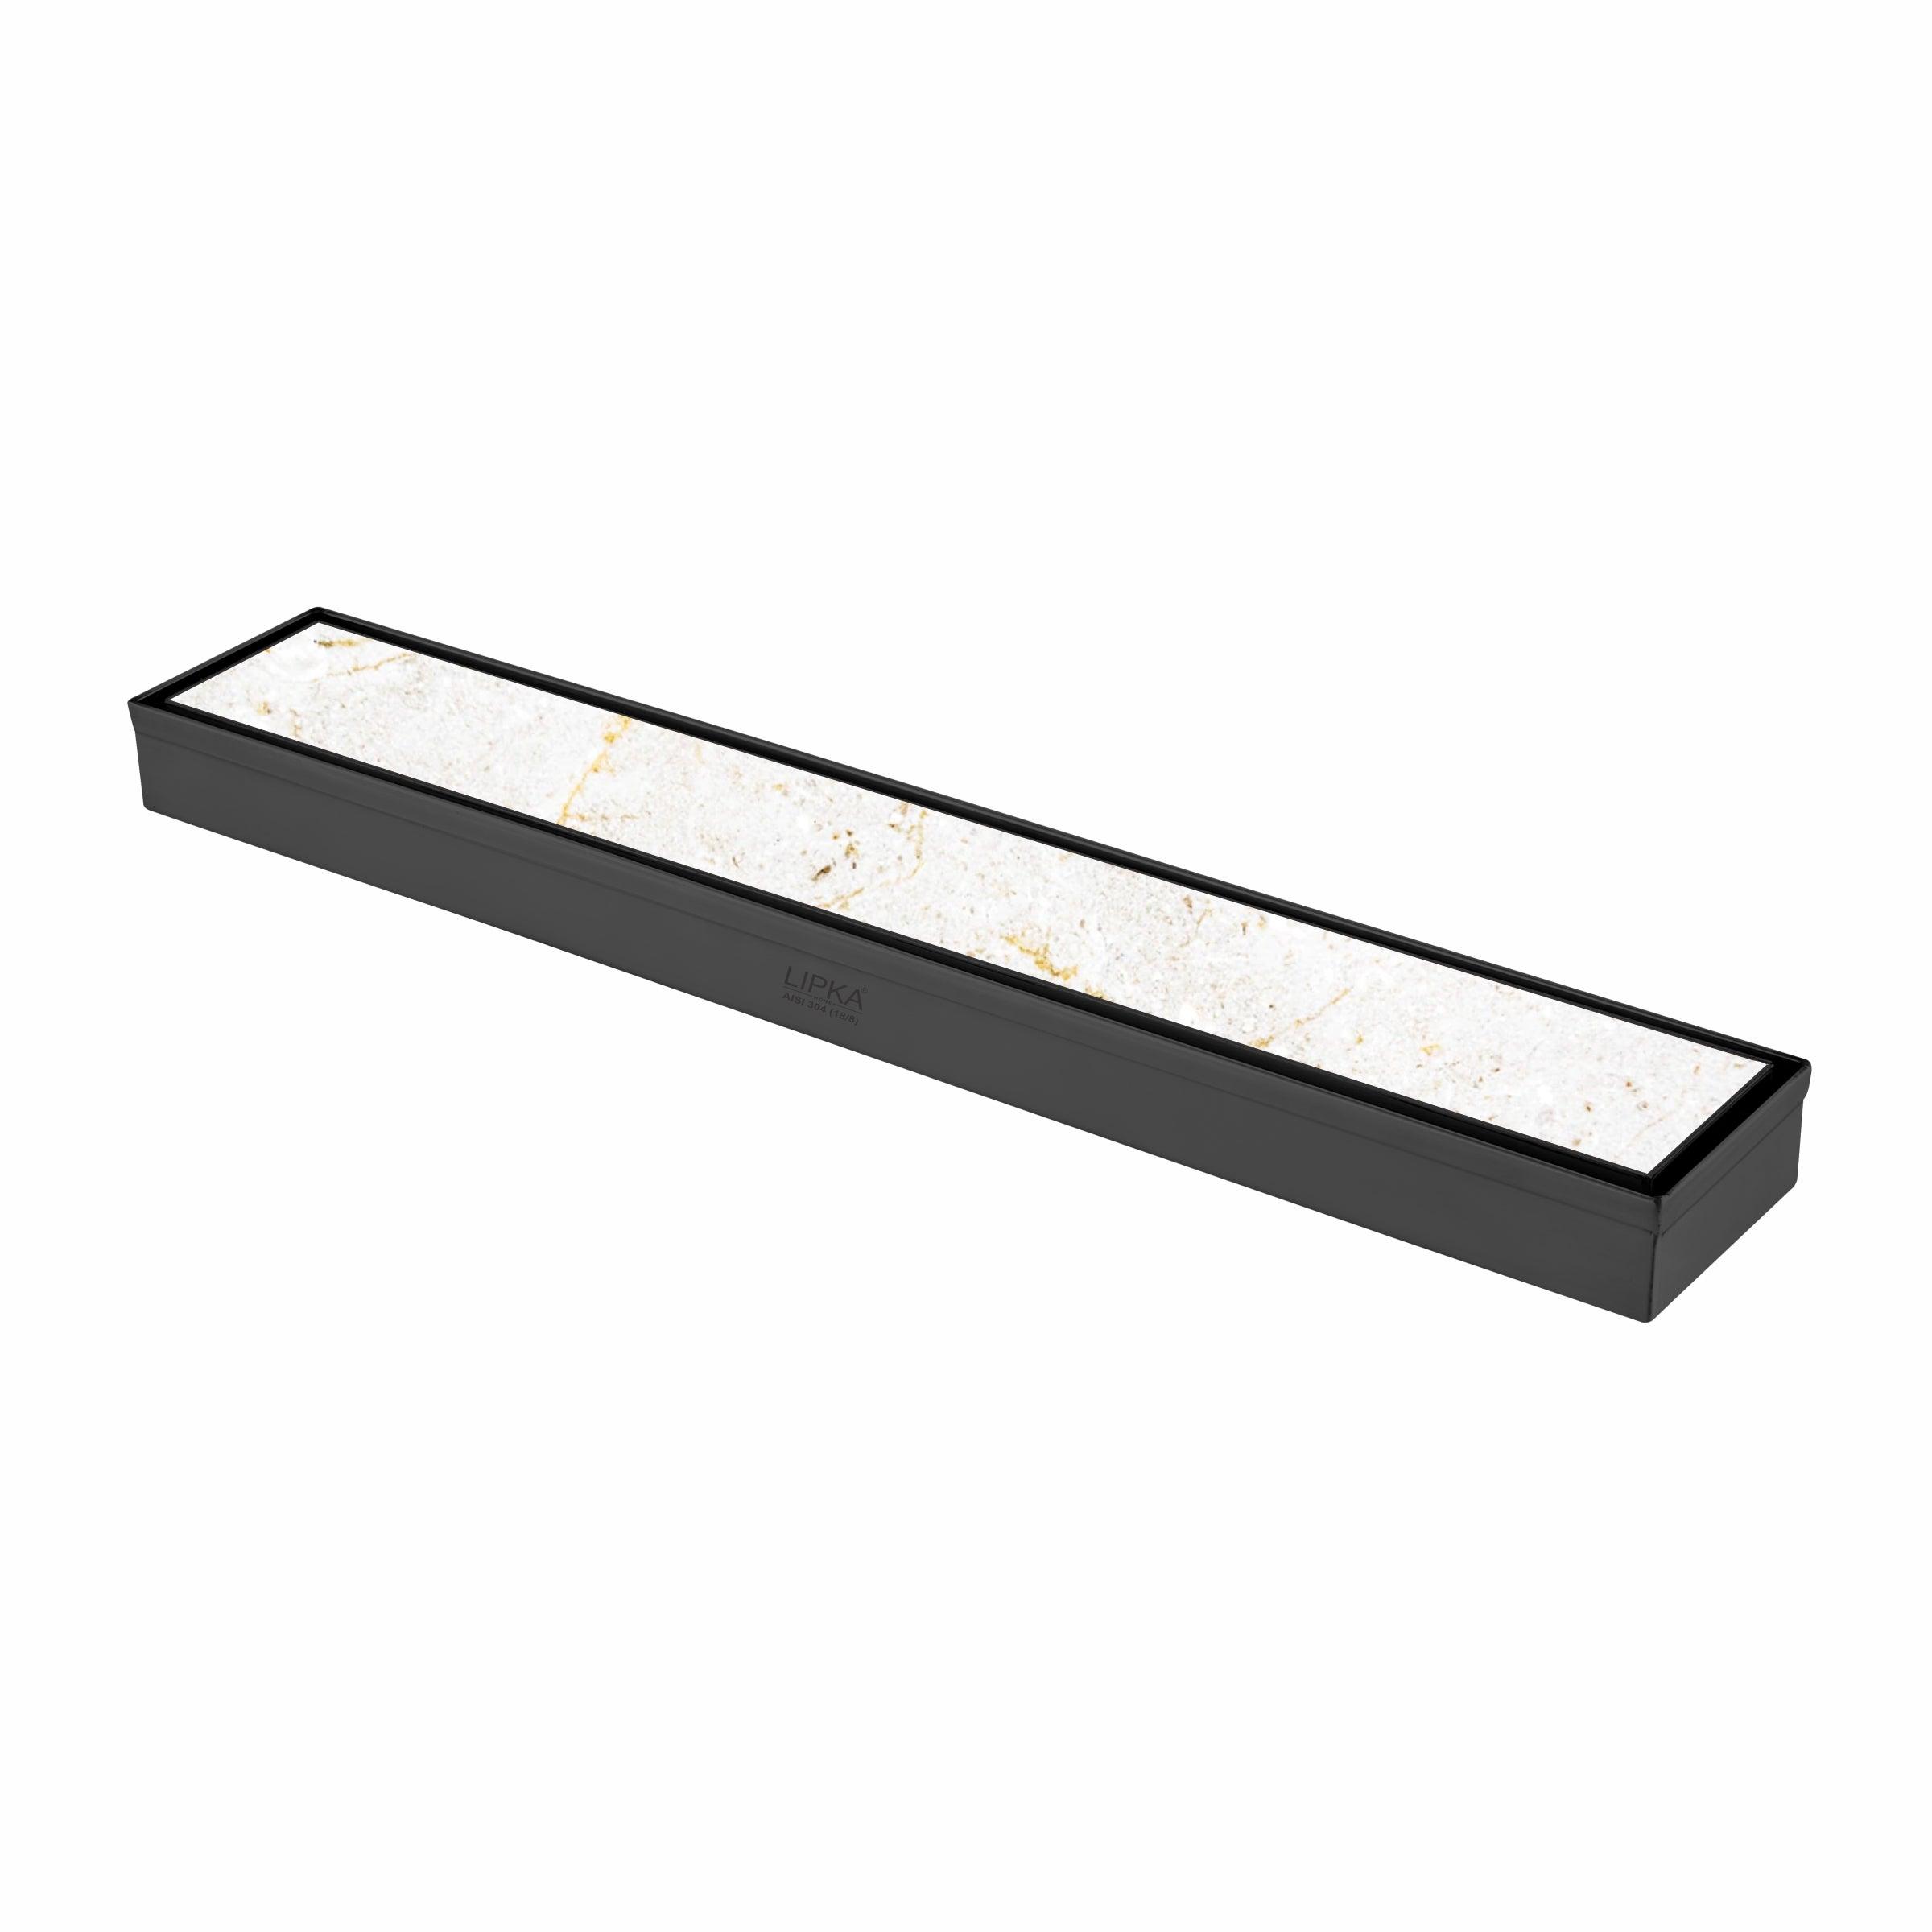 Tile Insert Shower Drain Channel - Black (24 x 2 Inches)